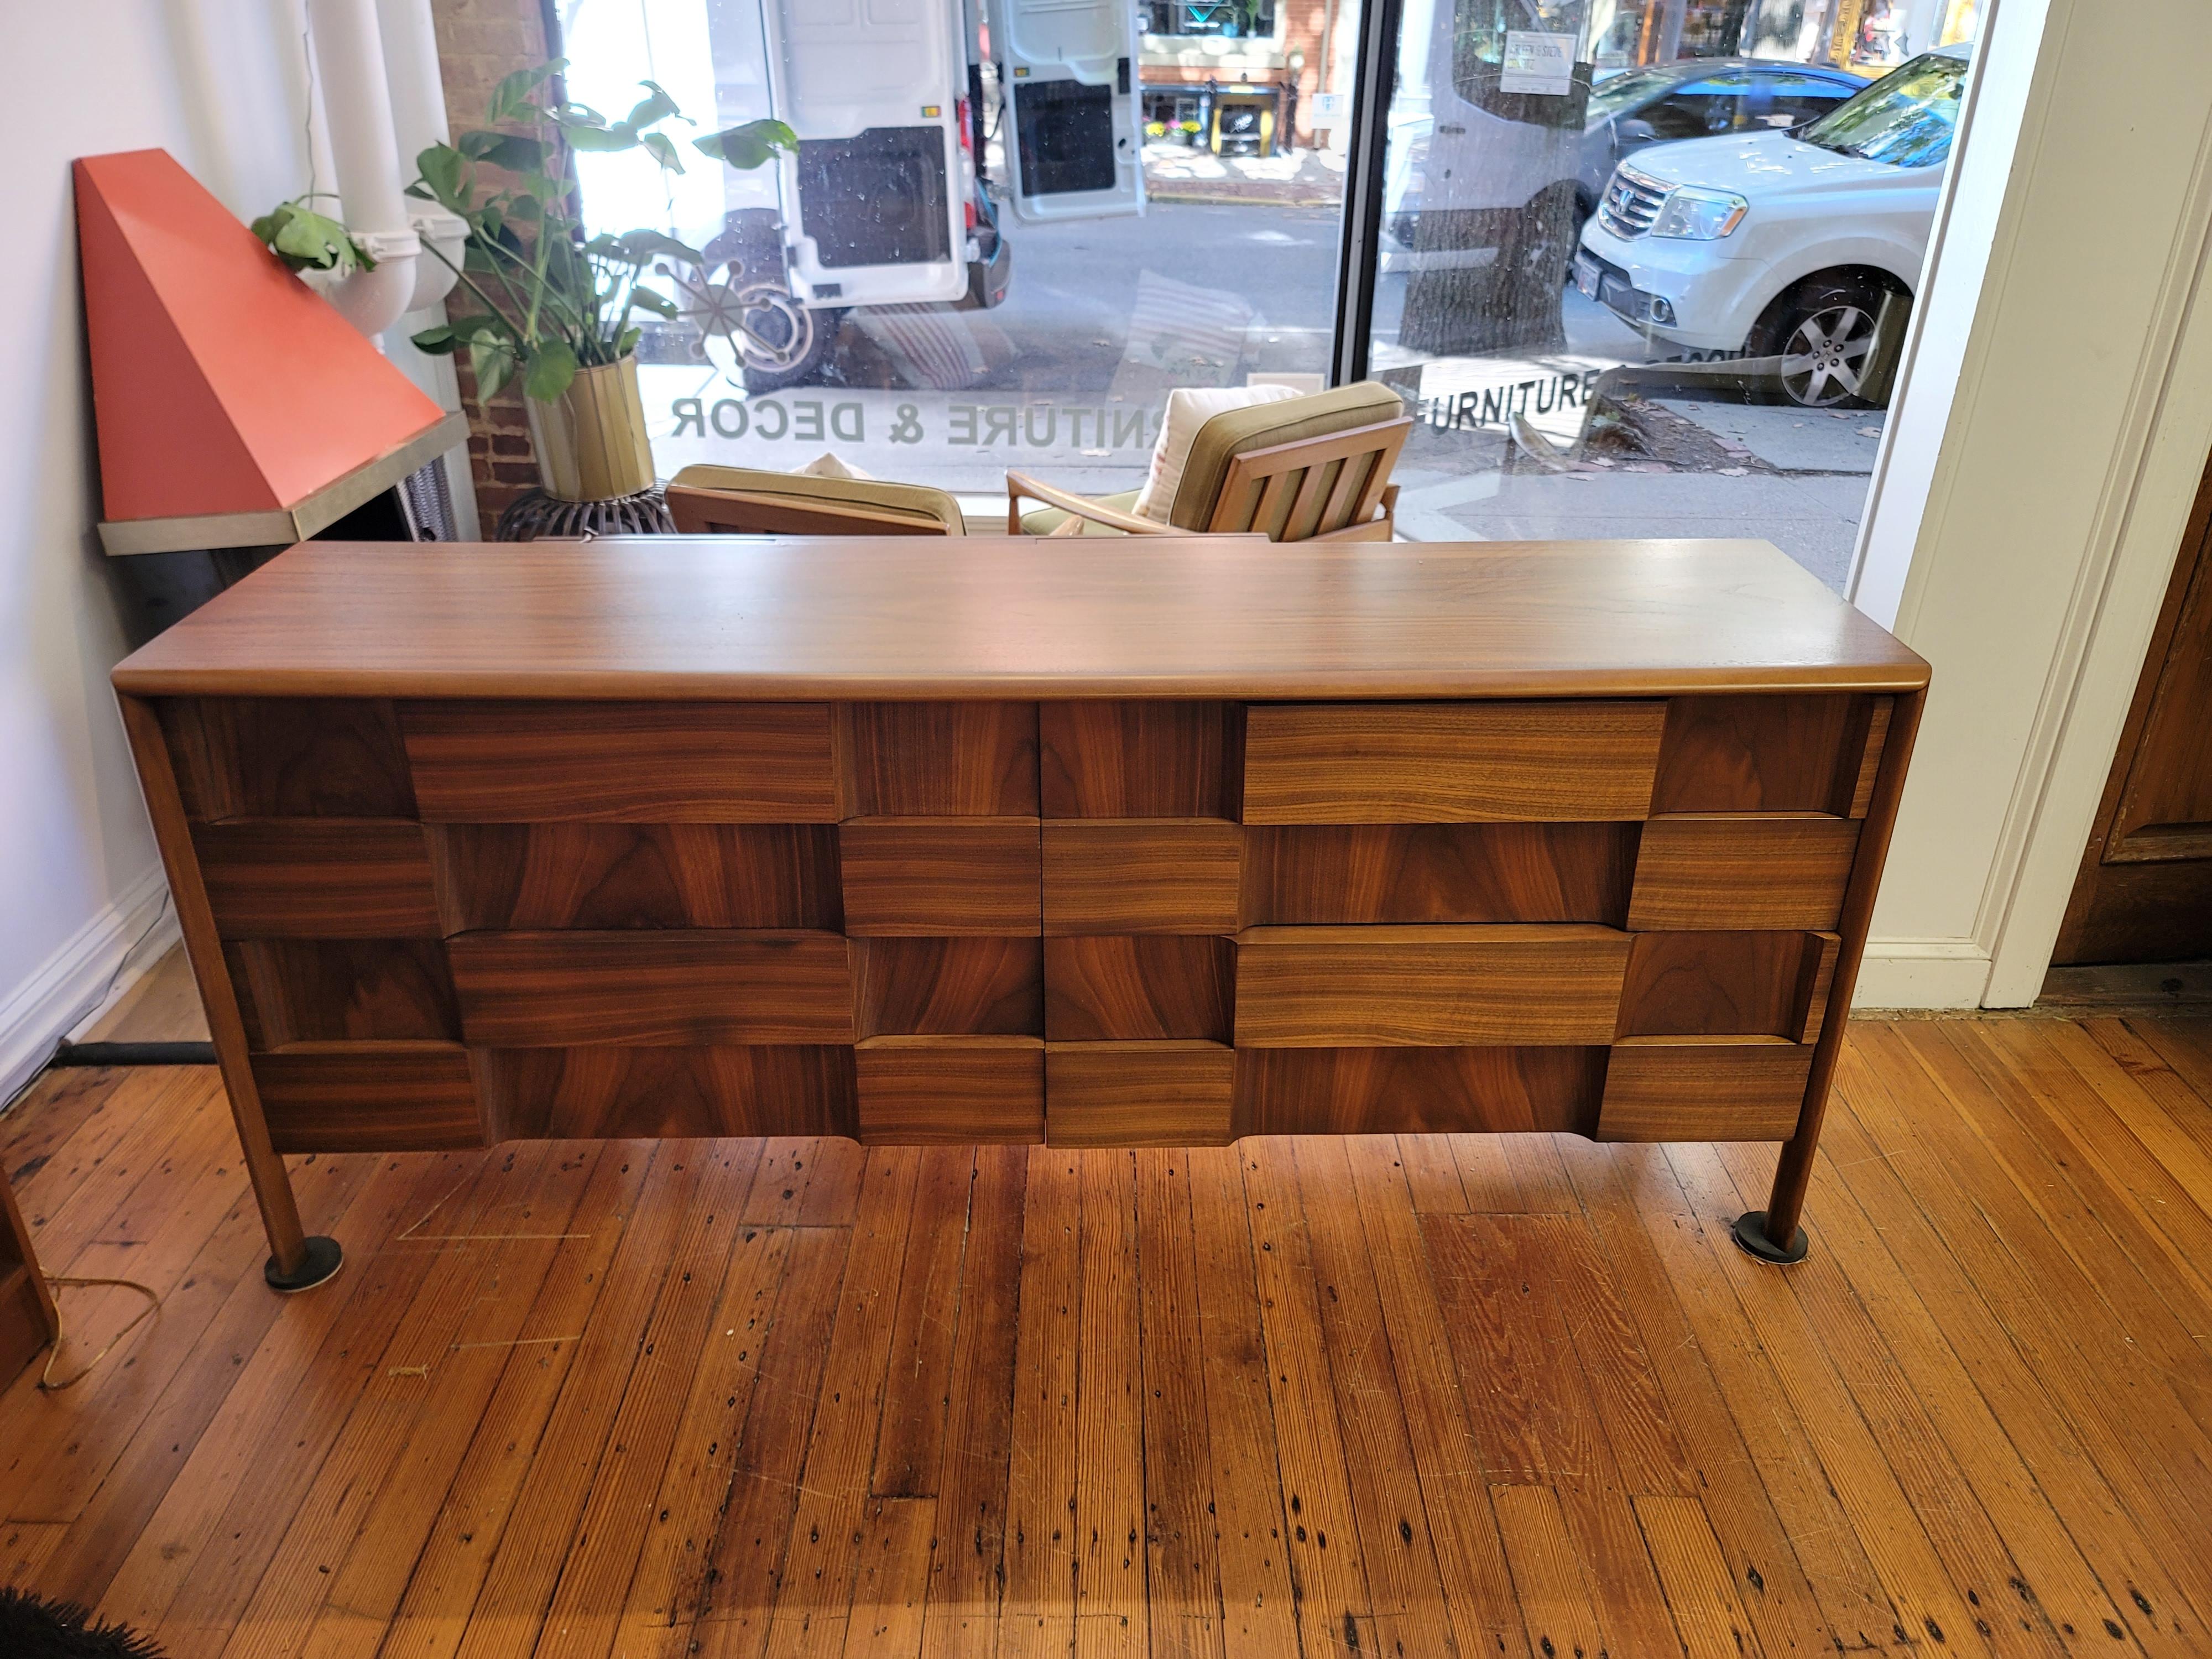 This walnut dresser with unusual sculpted drawer fronts is often referred to as the Checkerboard line designed by Edmond Spence. The quality is apparent with the bookmatched walnut drawer fronts and solid construction. Absolutely stunning example of